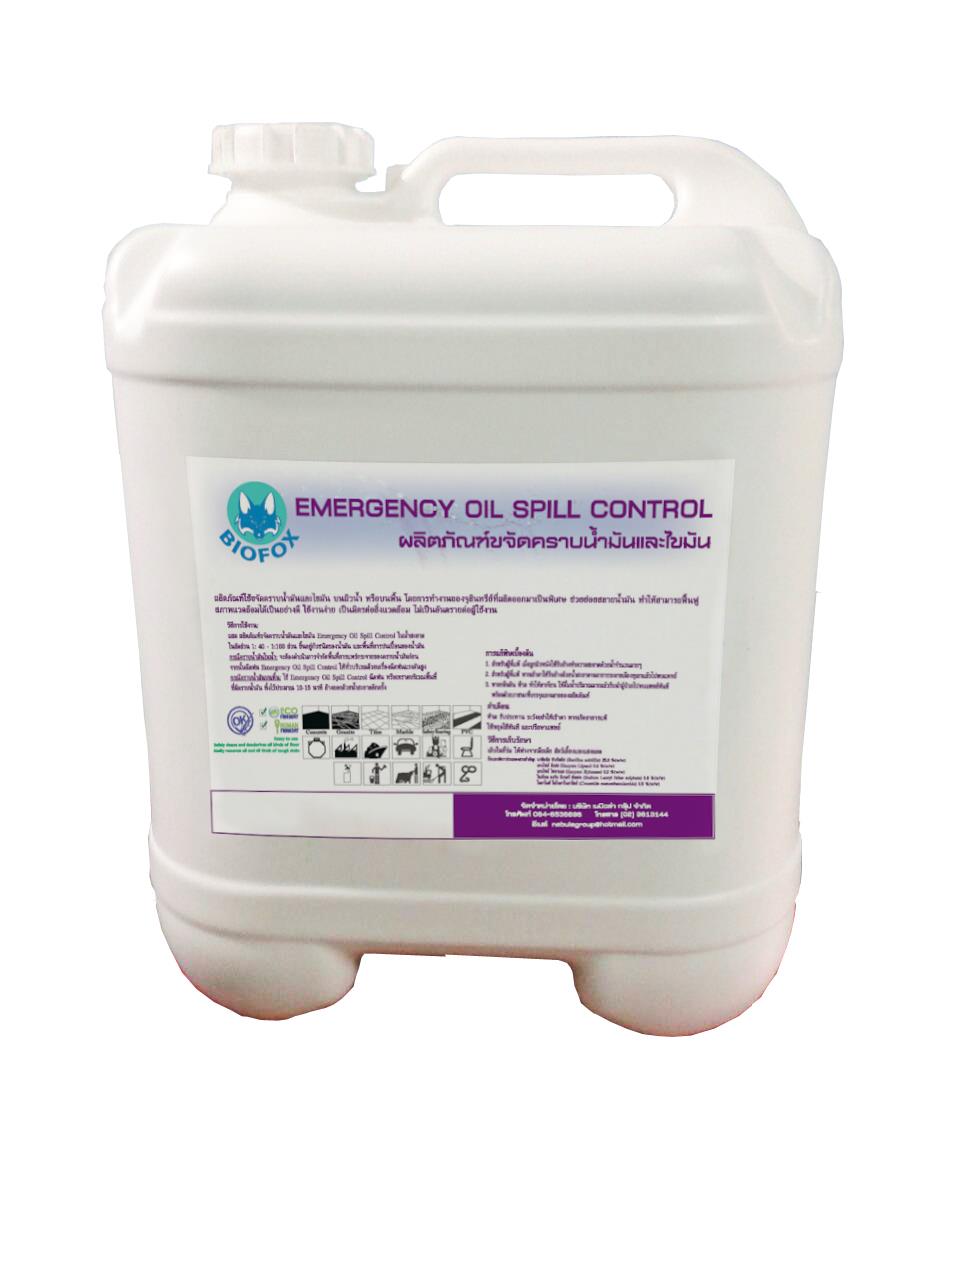 EMERGENCY OIL SPILL CONTROL ขจัดคราบน้ำมันและไขมันฉุกเฉิน,น้ำยาขจัดคราบน้ำมันและไขมันฉุกเฉิน,ขจัดคราบน้ำมันฉุกเฉิน,BIOFOX,Plant and Facility Equipment/Cleaning Equipment and Supplies/Cleaners